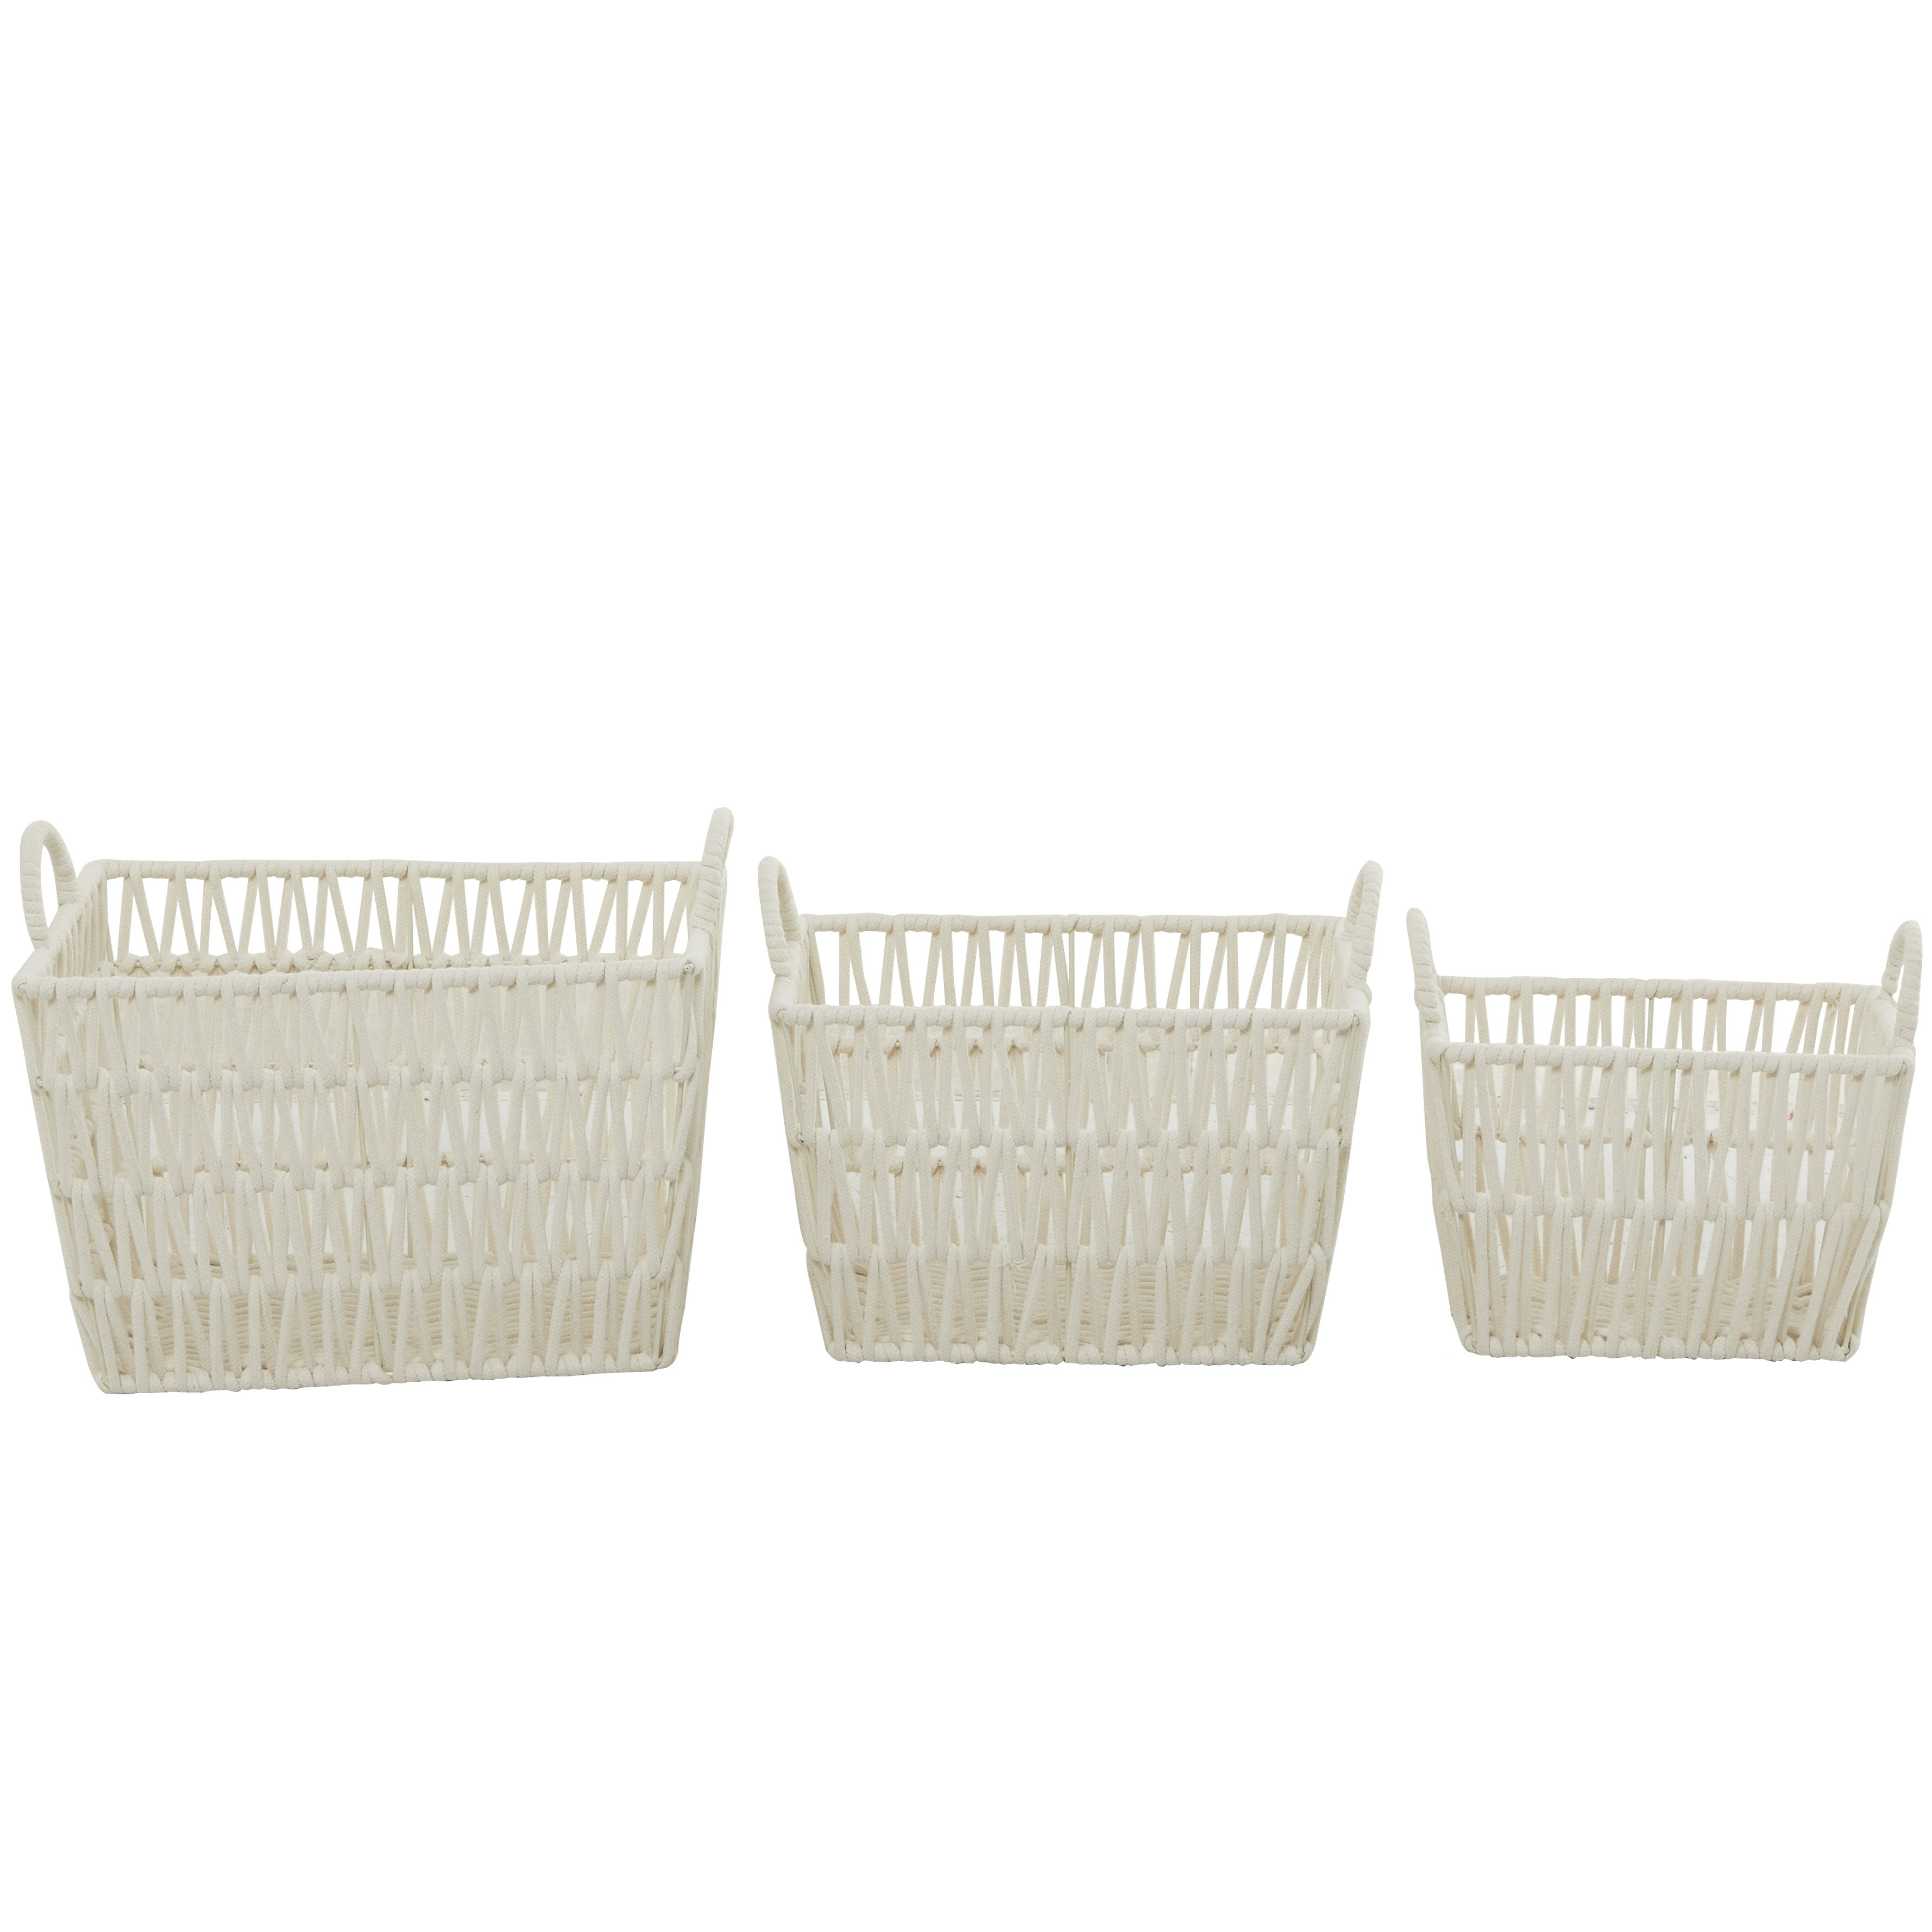 Plastic Basket, Small | The Stable Collection | Multi-Use Storage Basket | Rectangular Cabinet Organizer | Baskets for Organizing with Handles | Home